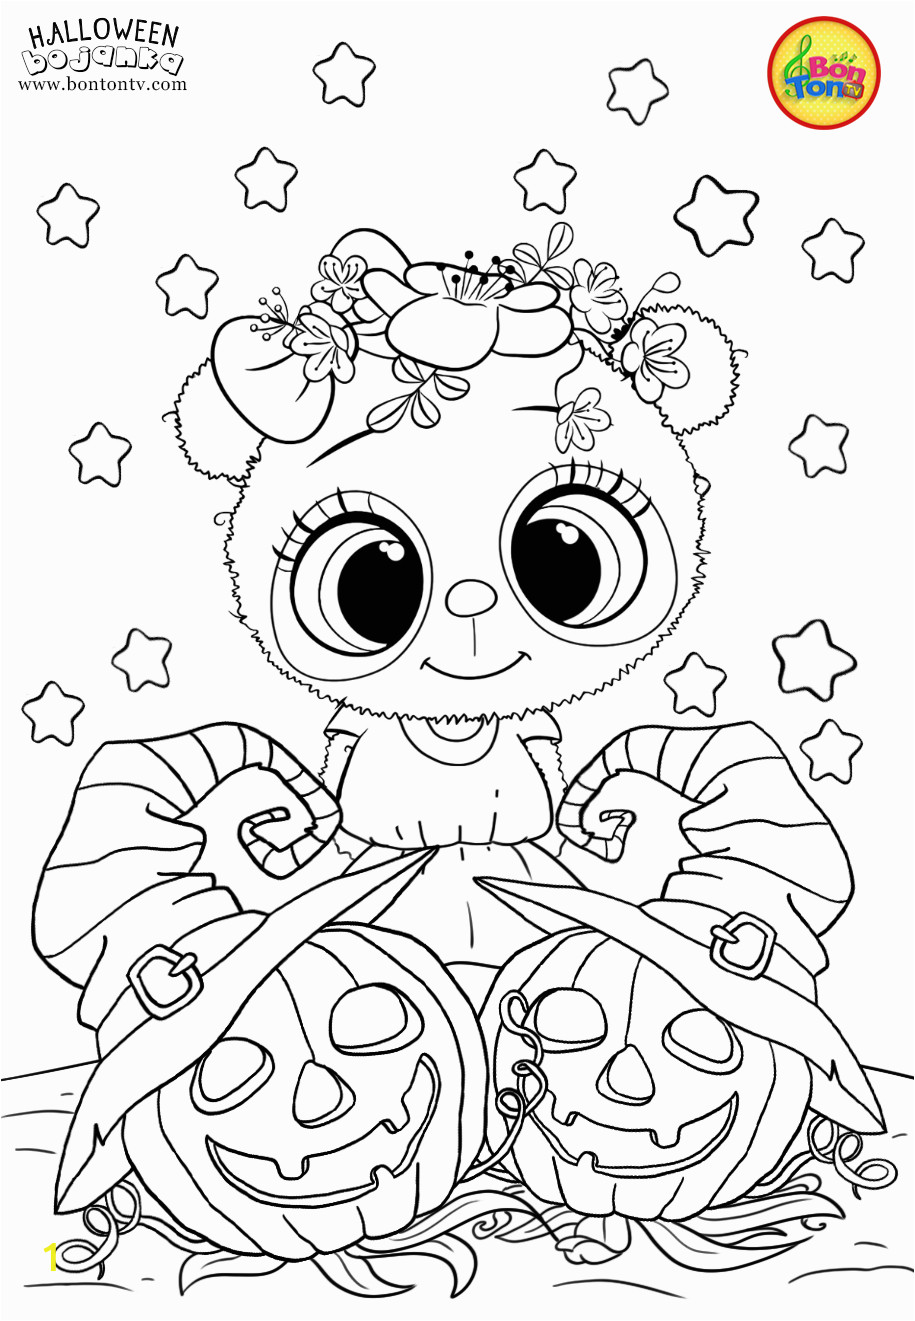 Scared Face Coloring Page Pinterest